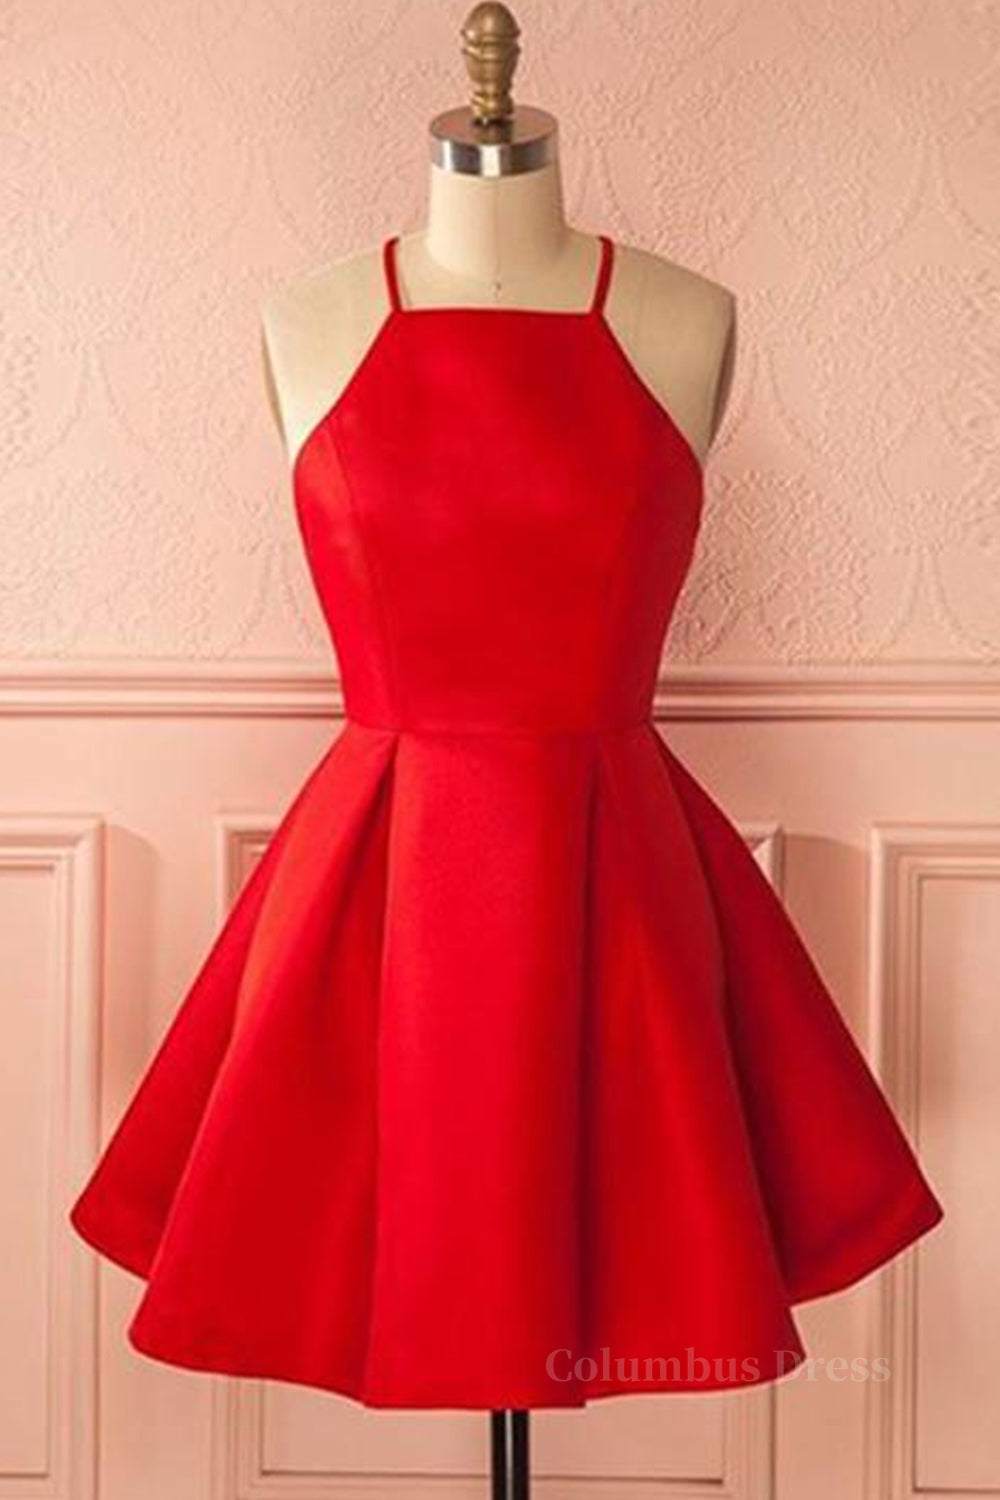 Simple Red Short Corset Prom Corset Homecoming Dresses, Short Red Mini Corset Formal Graduation Evening Dresses outfit, Party Dresses For Over 53S